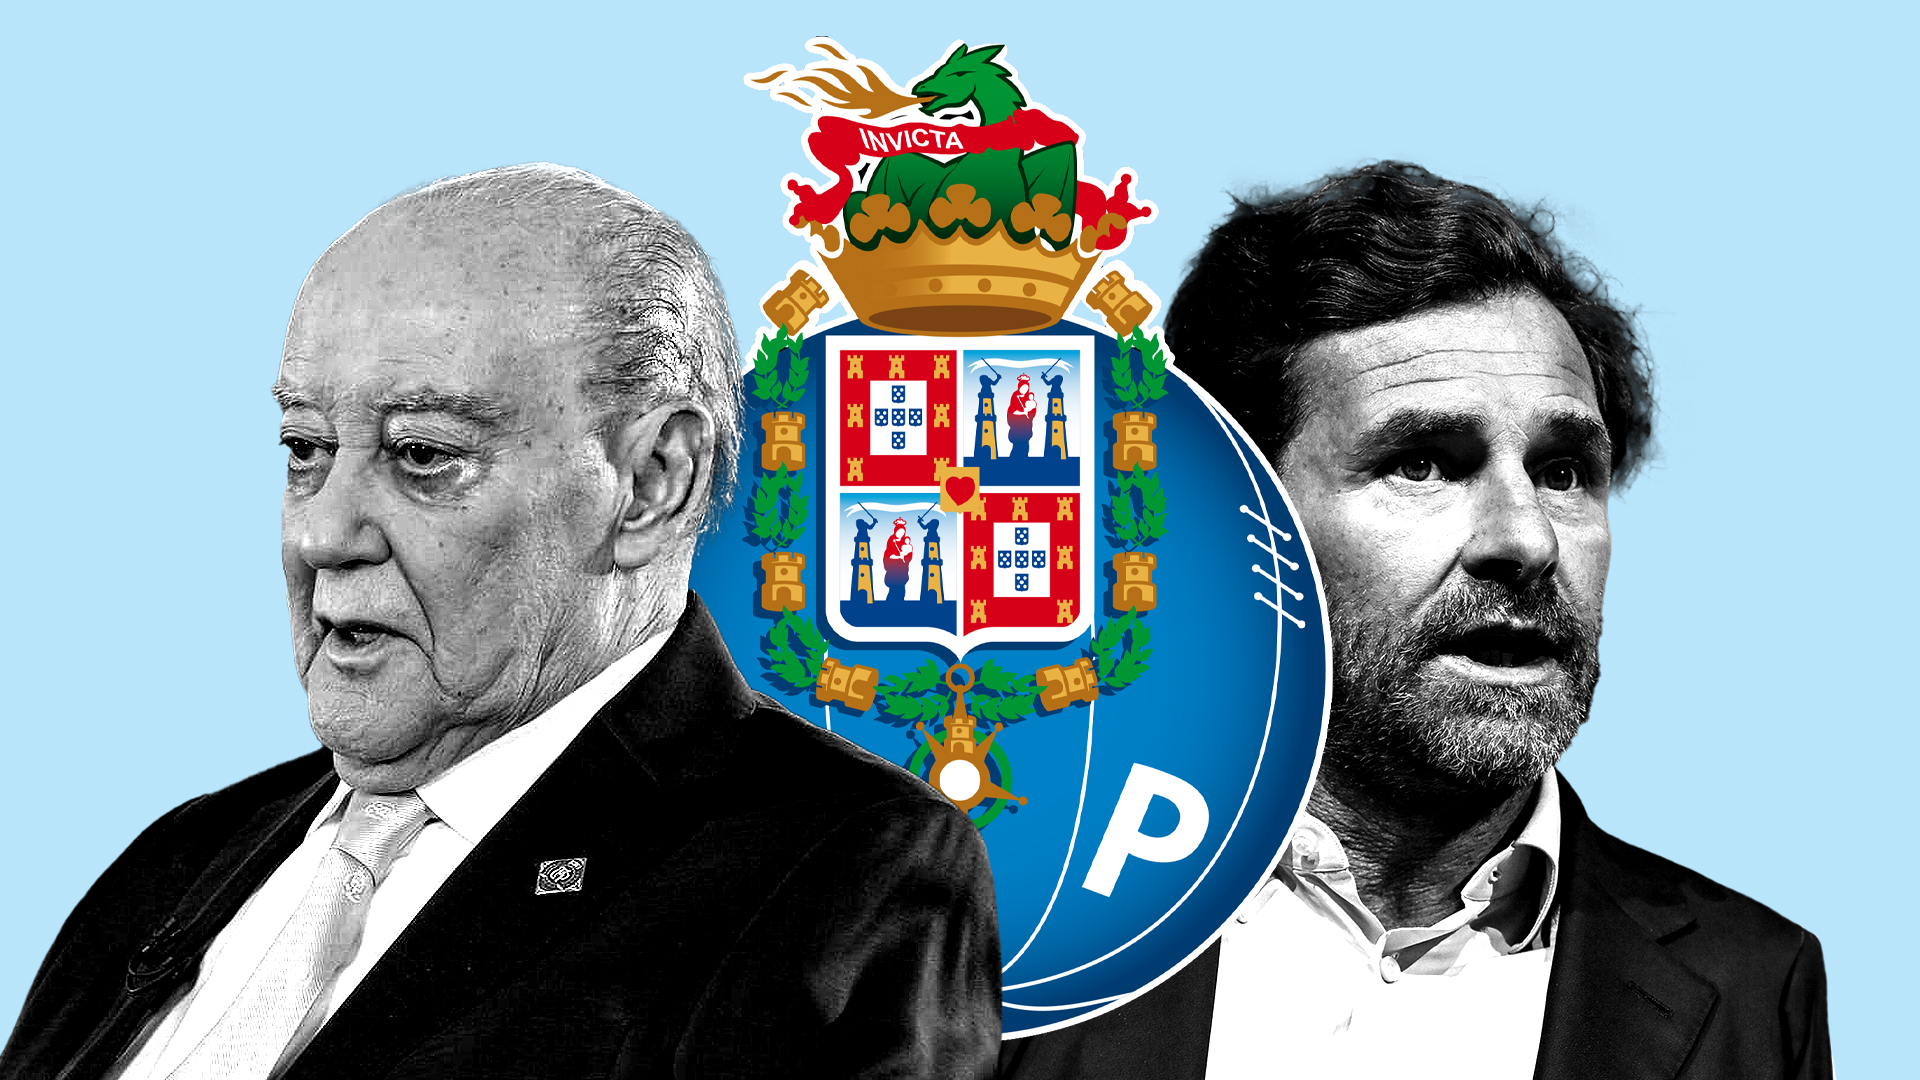 Key thoughts of Pinto da Costa and André Villas-Boas before the duel at the ballot boxes